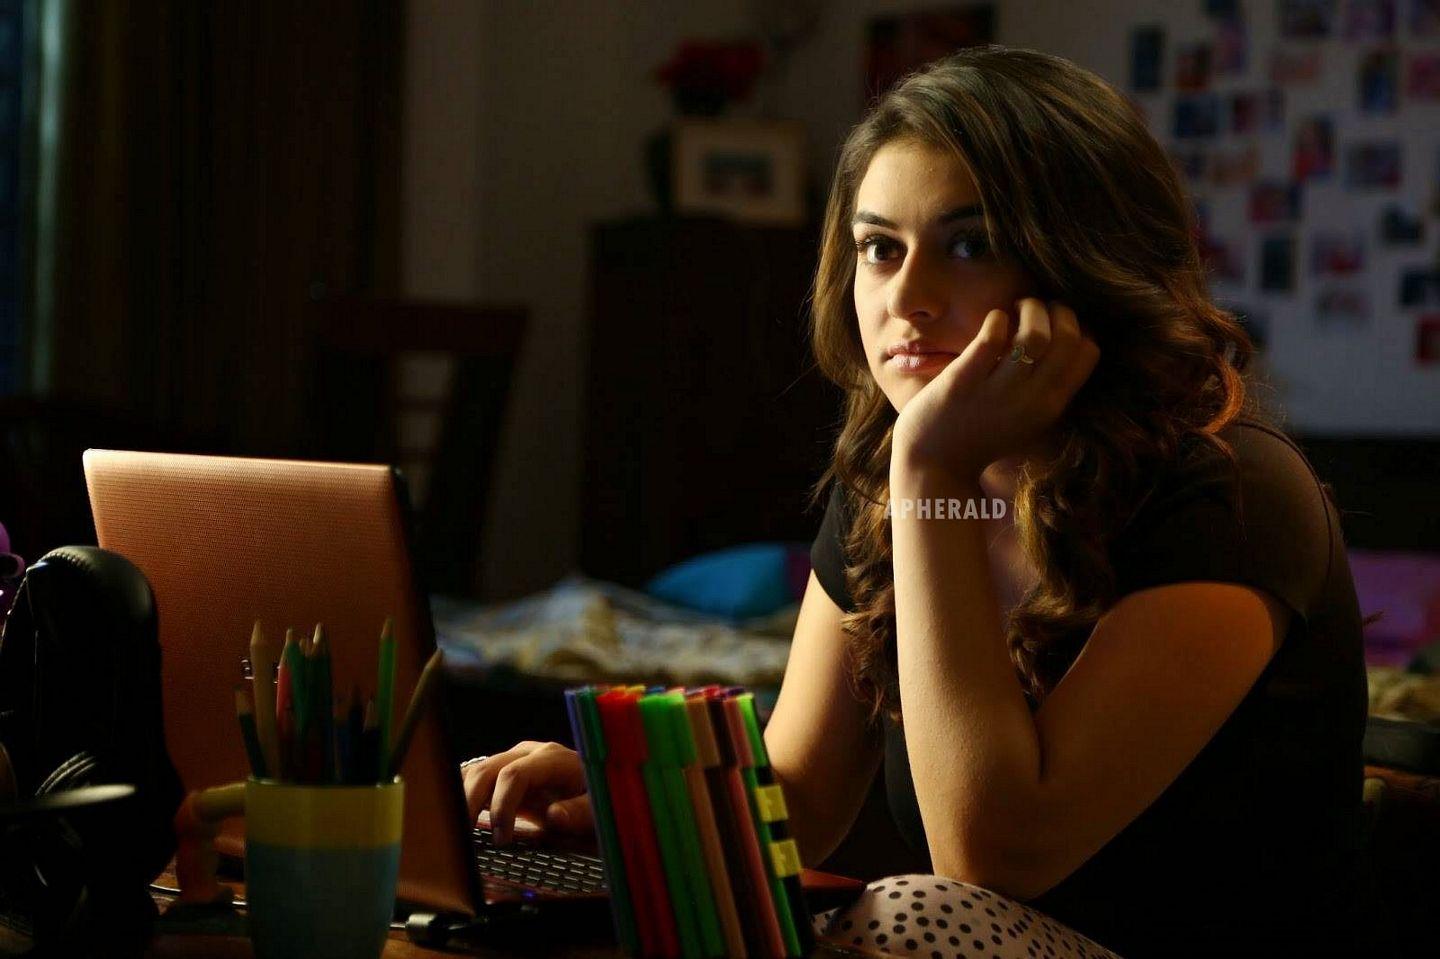 Unseen photos of Hansika from her early days